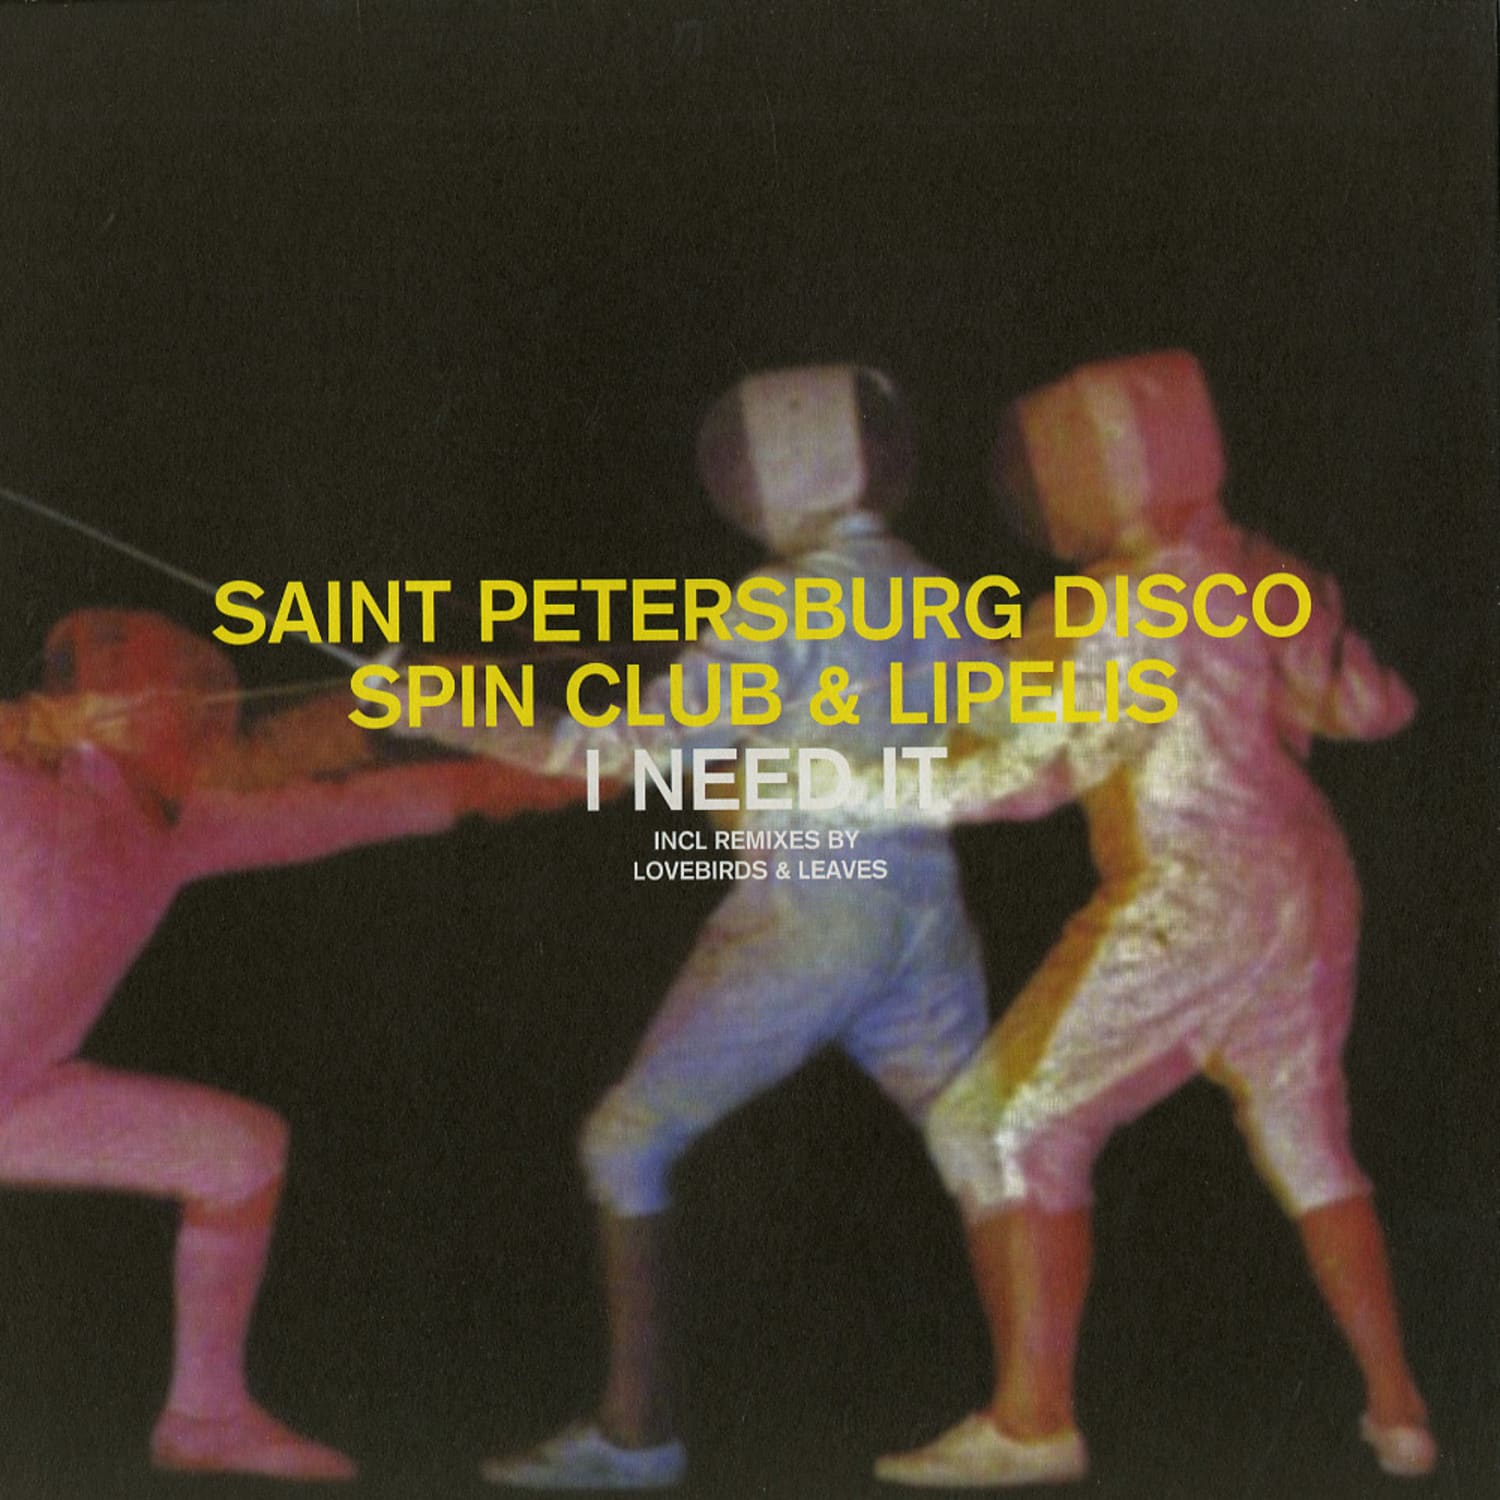 The Saint Petersburg Disco Spin Club & L - I NEED IT, LOVEBIRDS MIX, LEAVES MIX